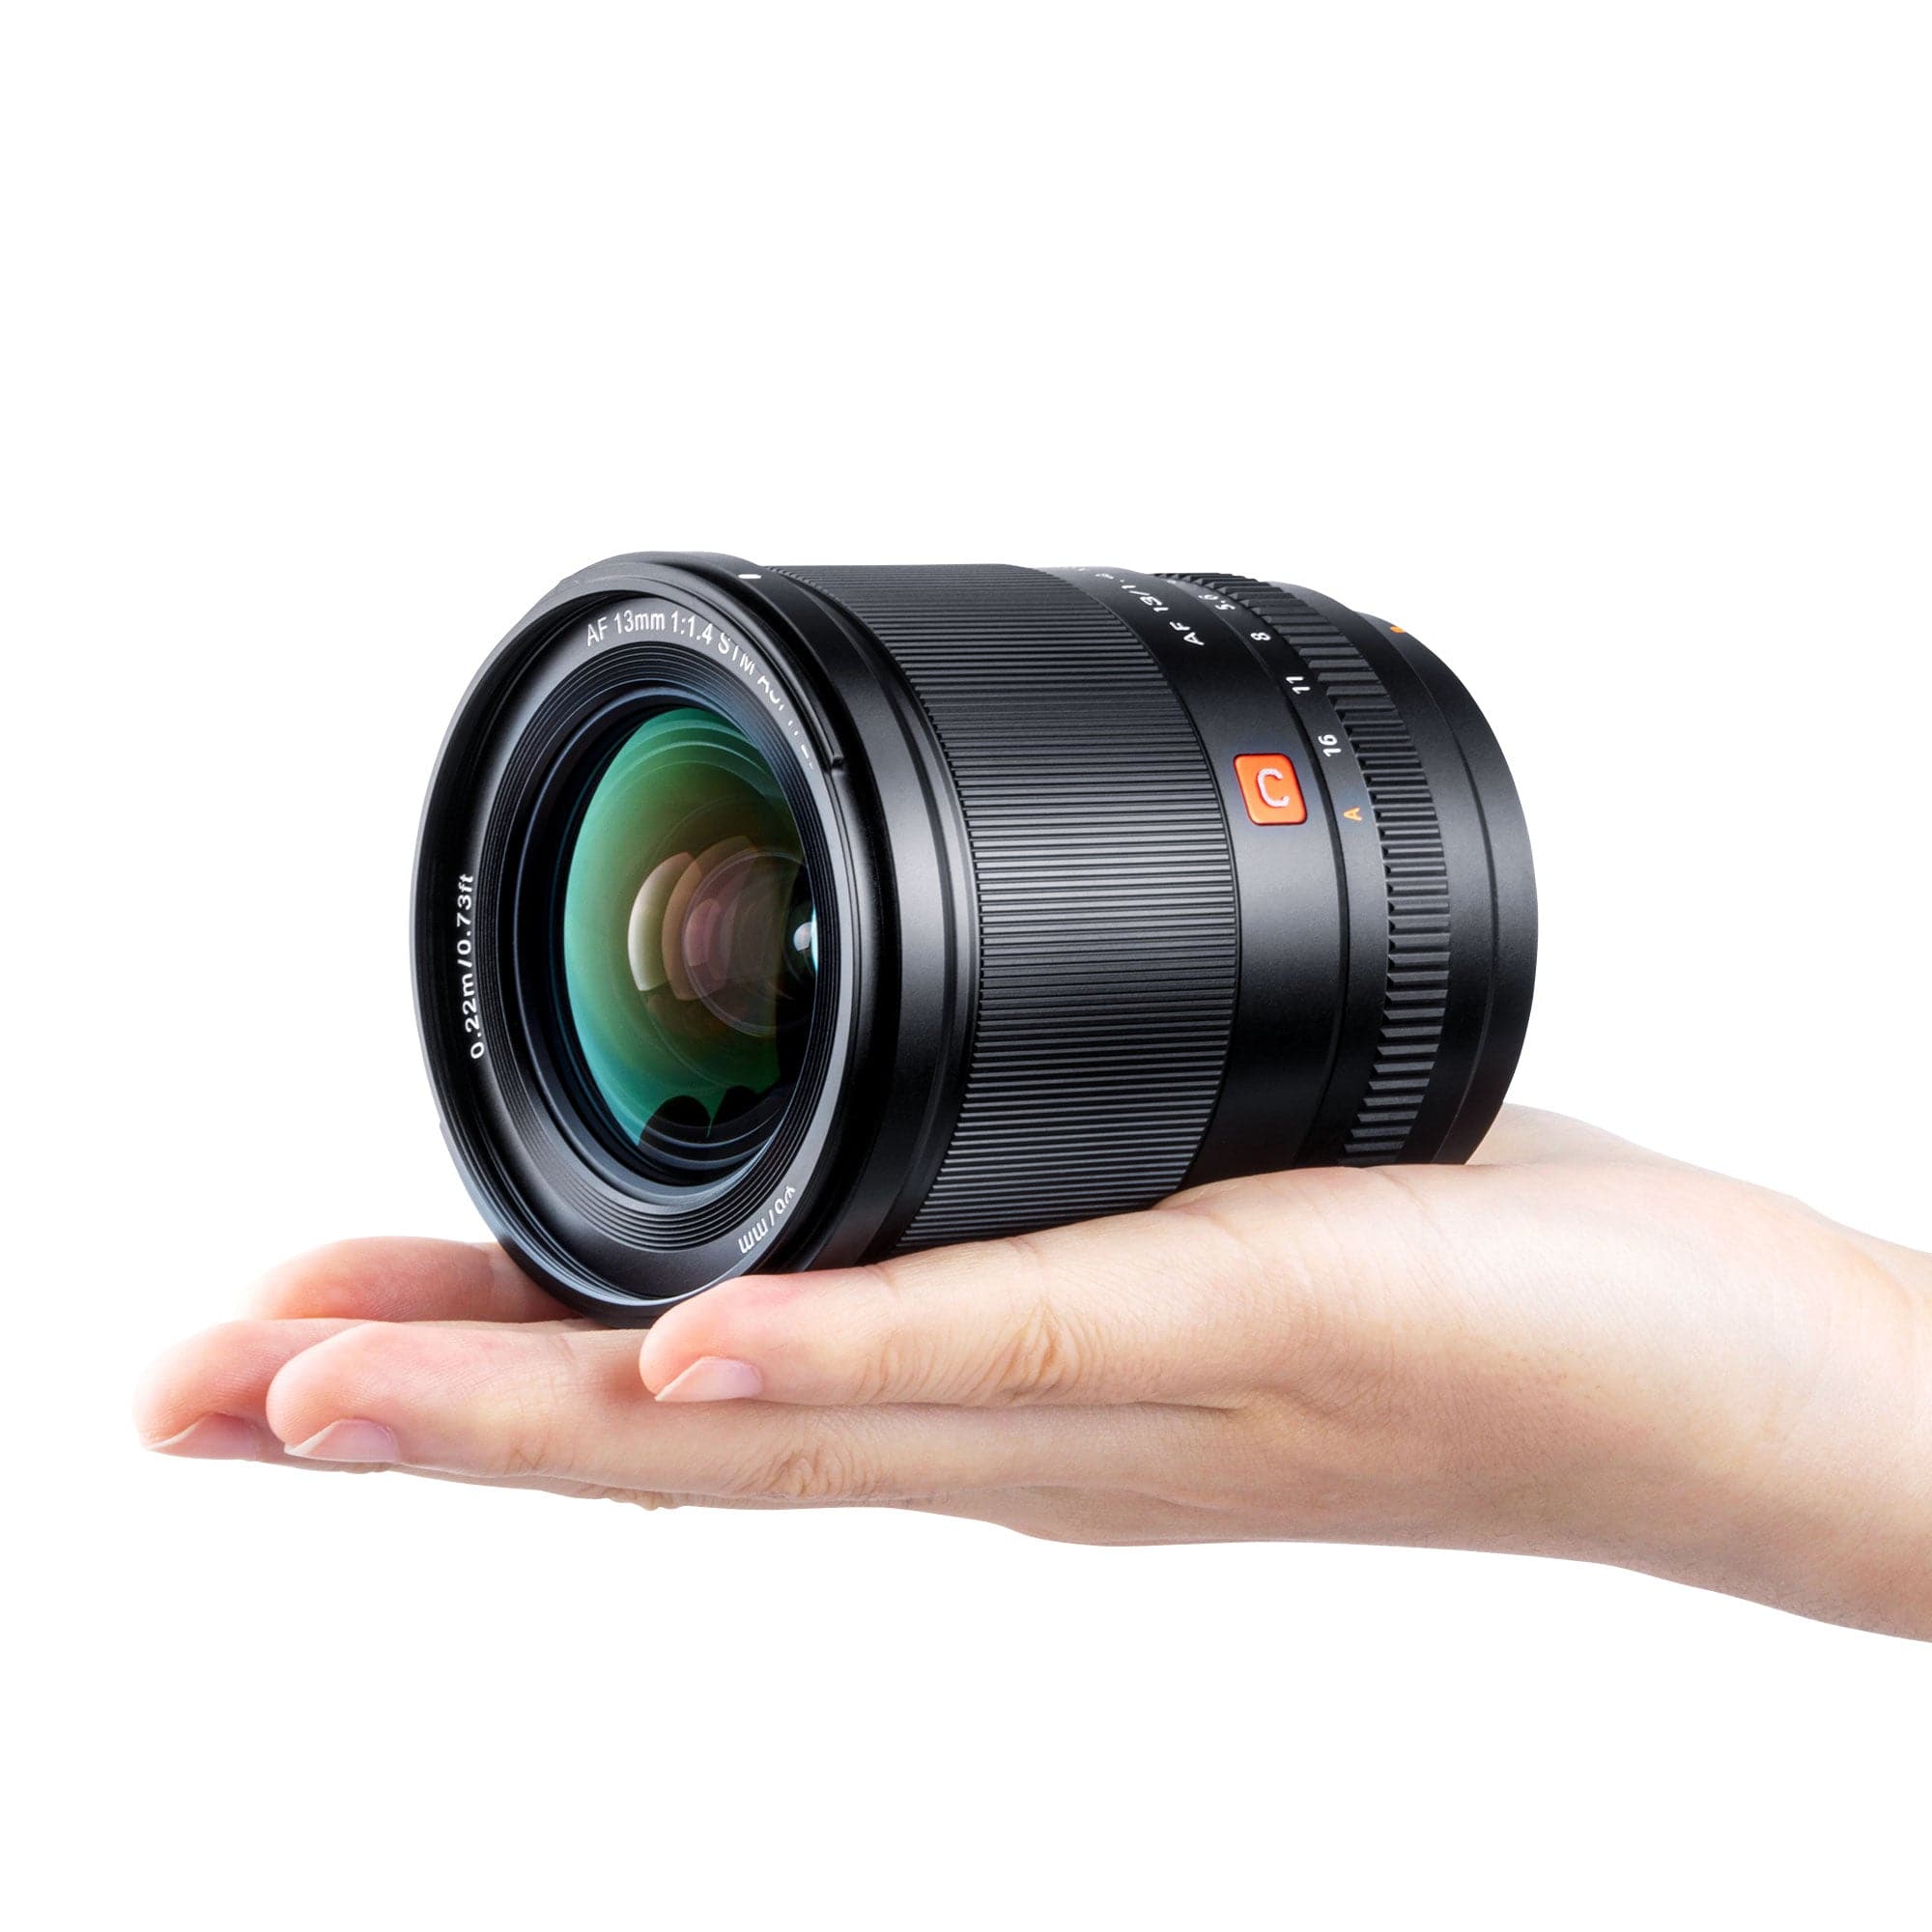 VILTROX 13mm F1.4 XF Auto Focus Ultra Wide Angle Lens Support Eye AF Face Detection Designed for Fujifilm X-mount Camera Models